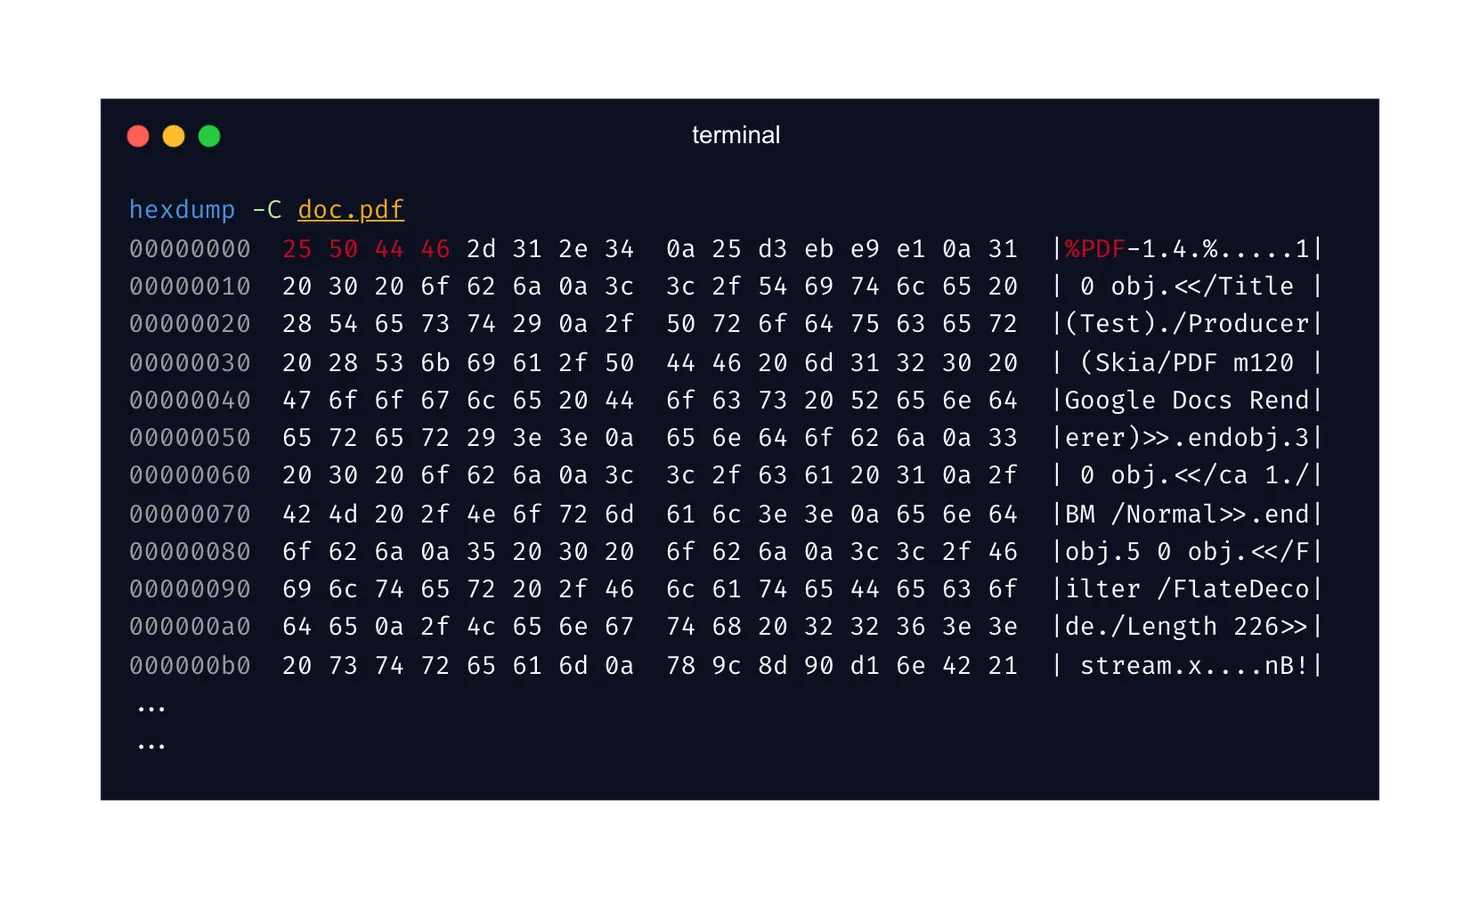 Output of the hexdump -C command on a pdf in a terminal. With a highlight on the first hex digits 25 50 44 46 corresponding to the PDF format